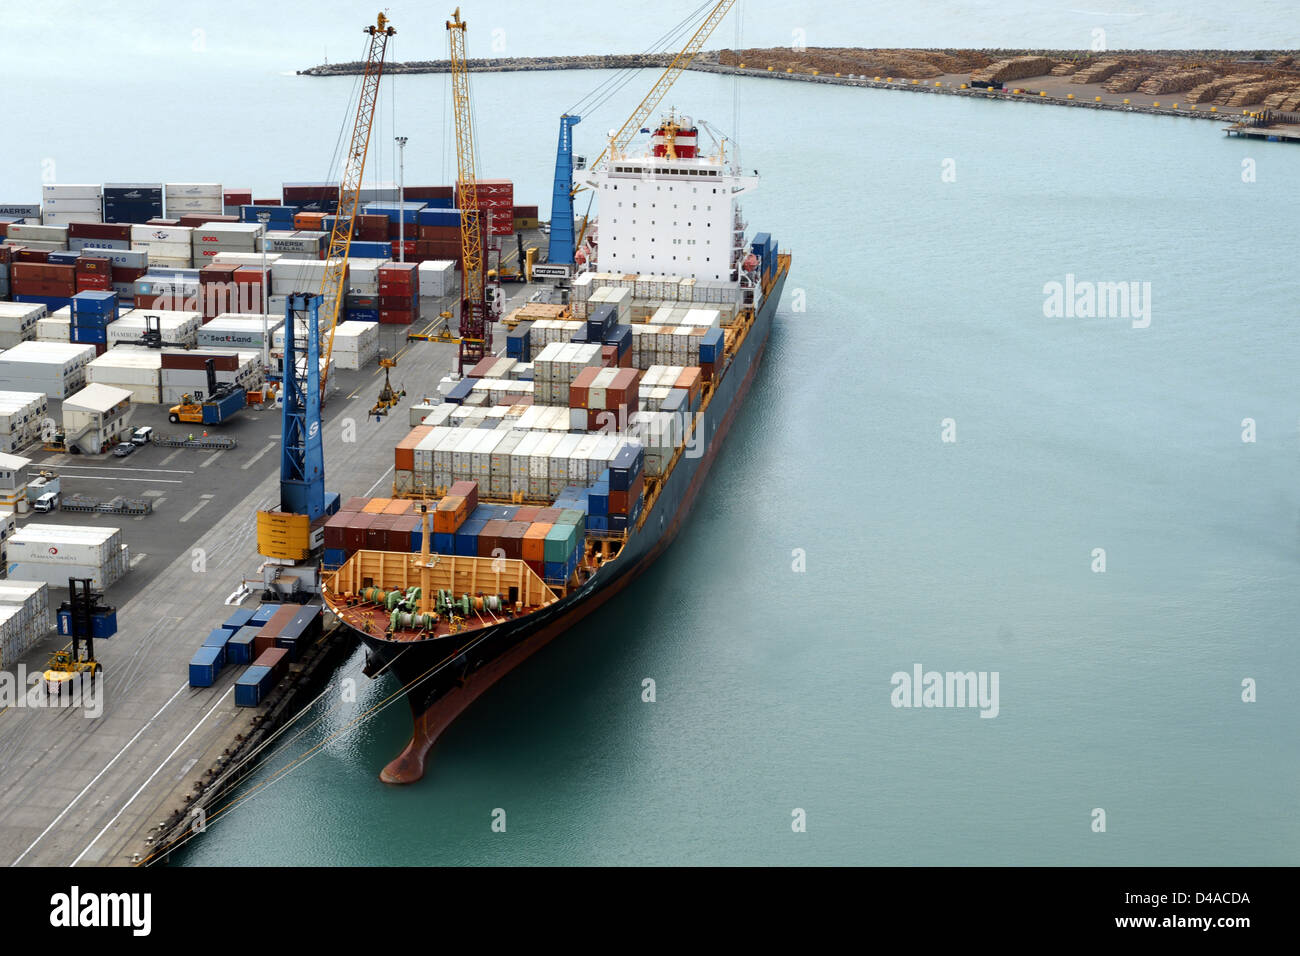 The container ship Kota Lukis being loaded at the port of Napier in New Zealand Stock Photo